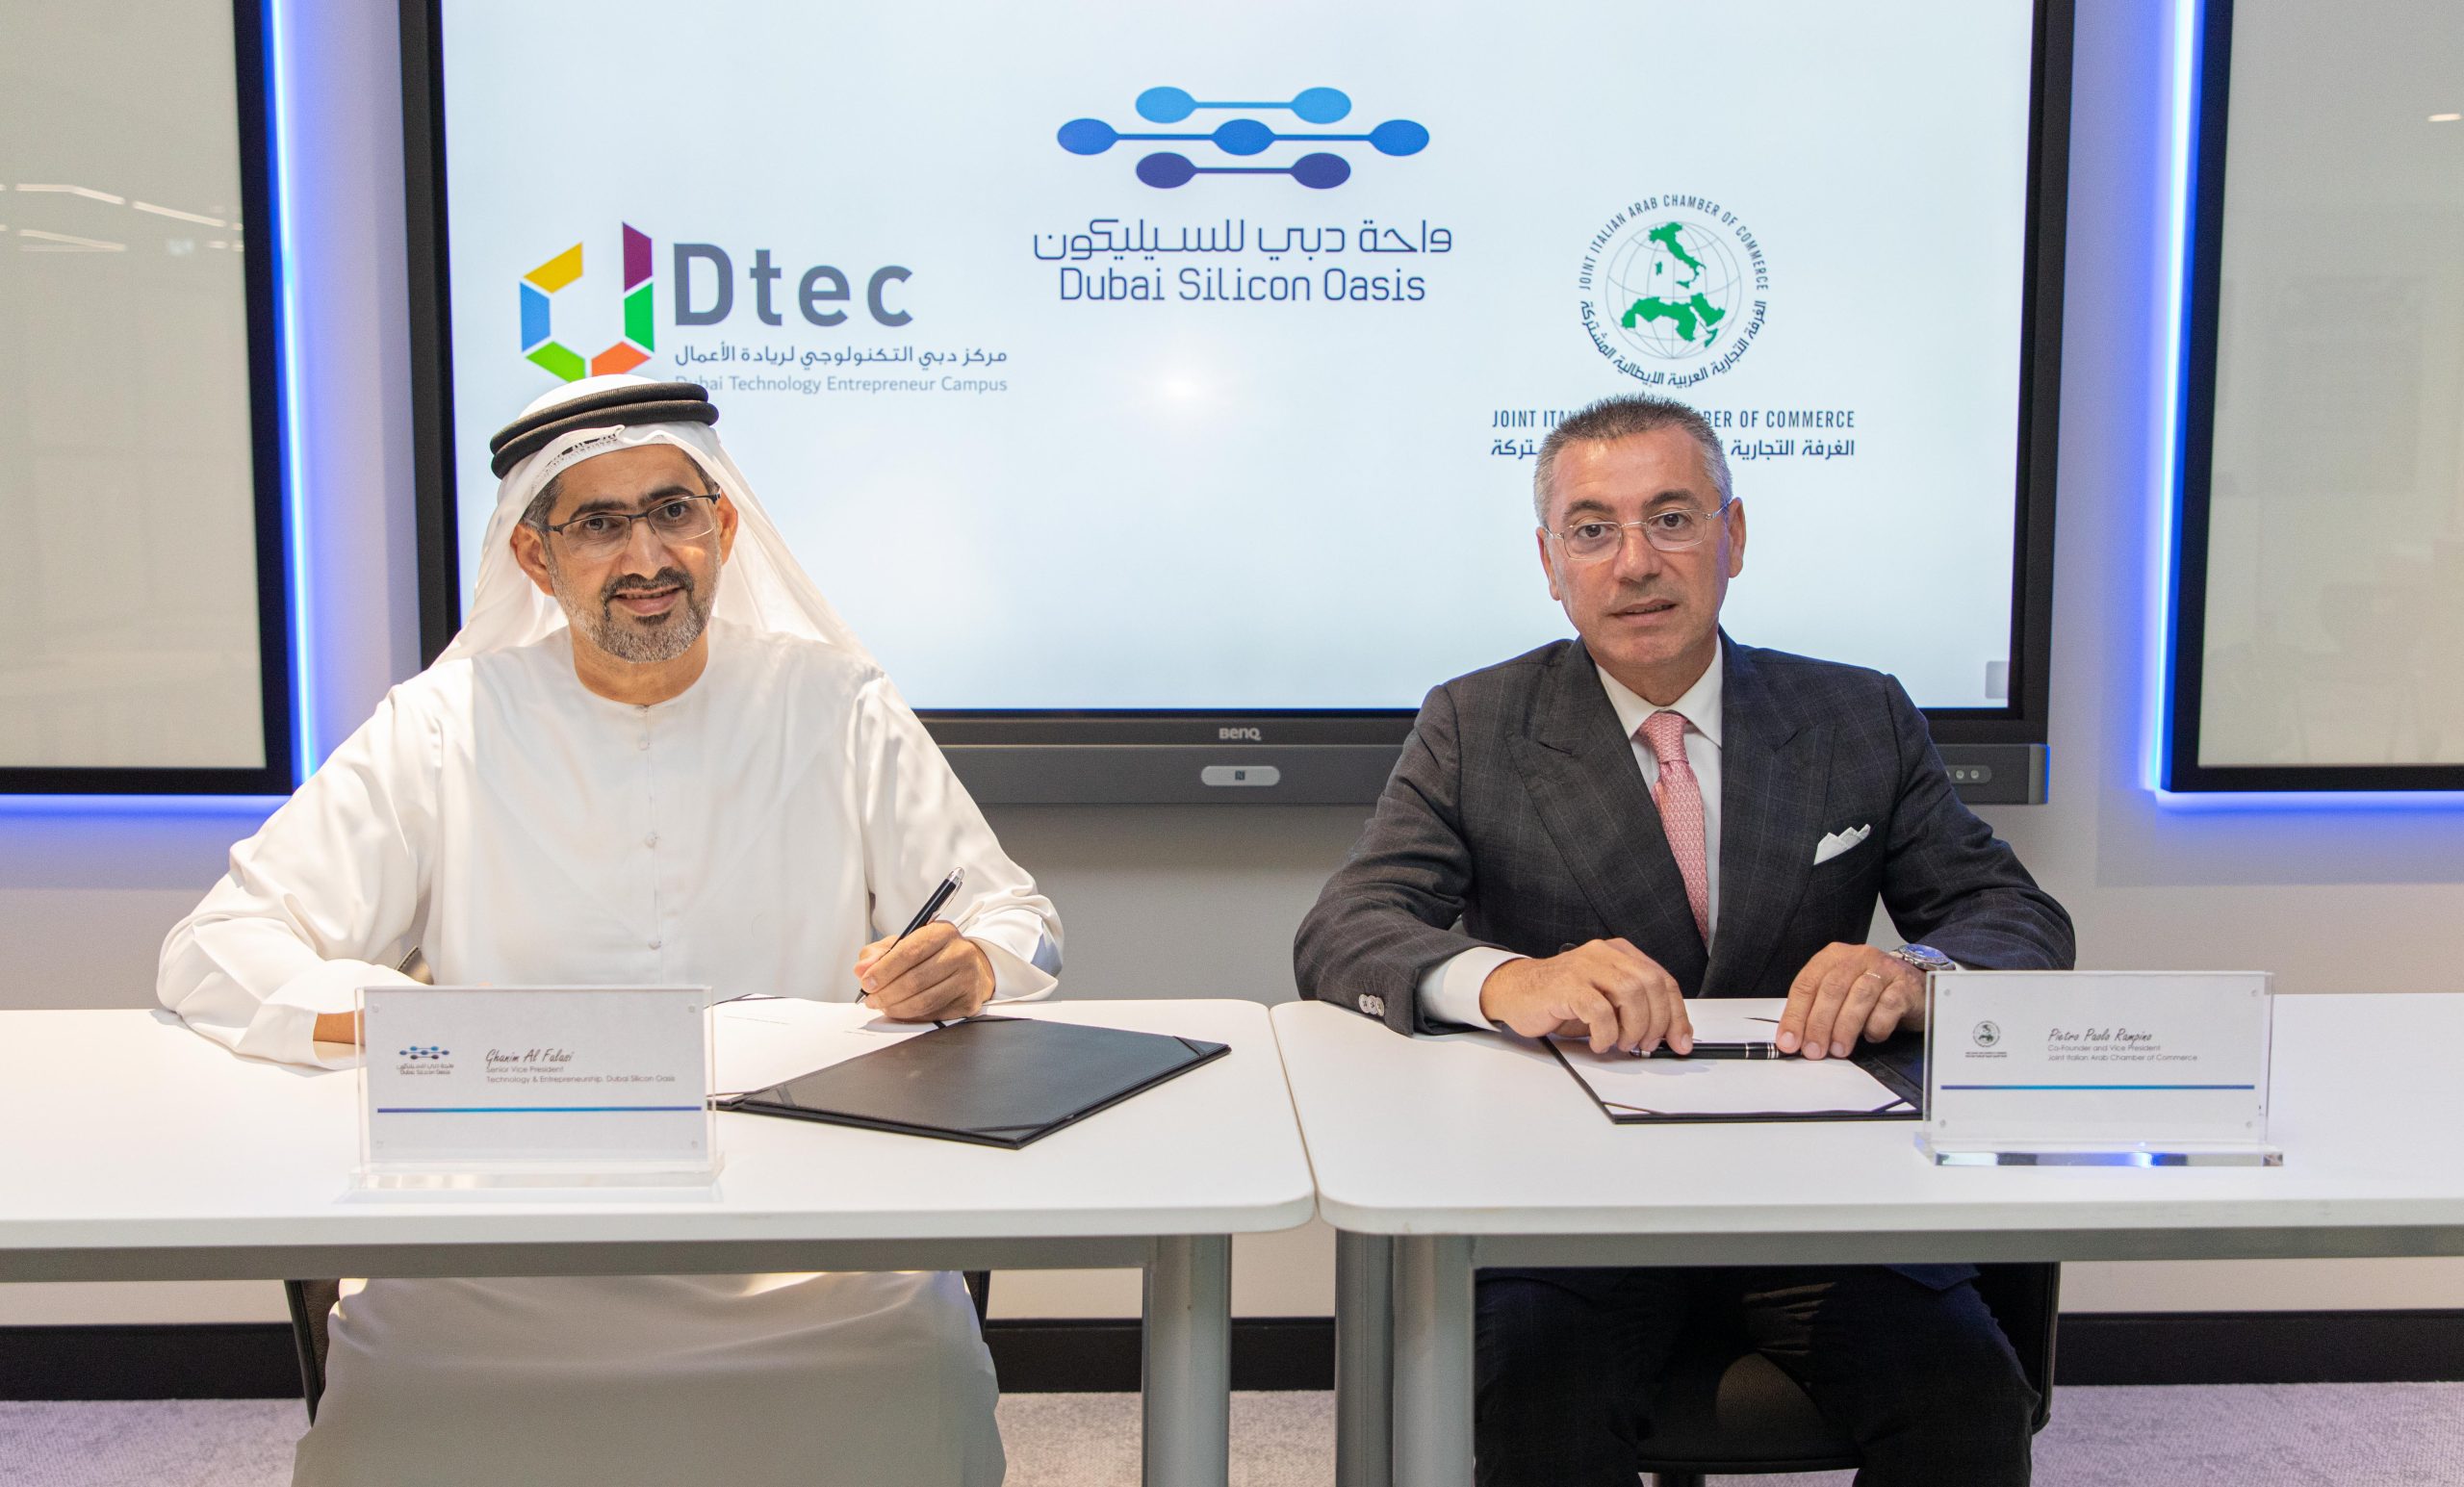 dubai-technology-entrepreneur-campus-partners-with-italia-arab-chamber-of-commerce-for-knowledge-sharing